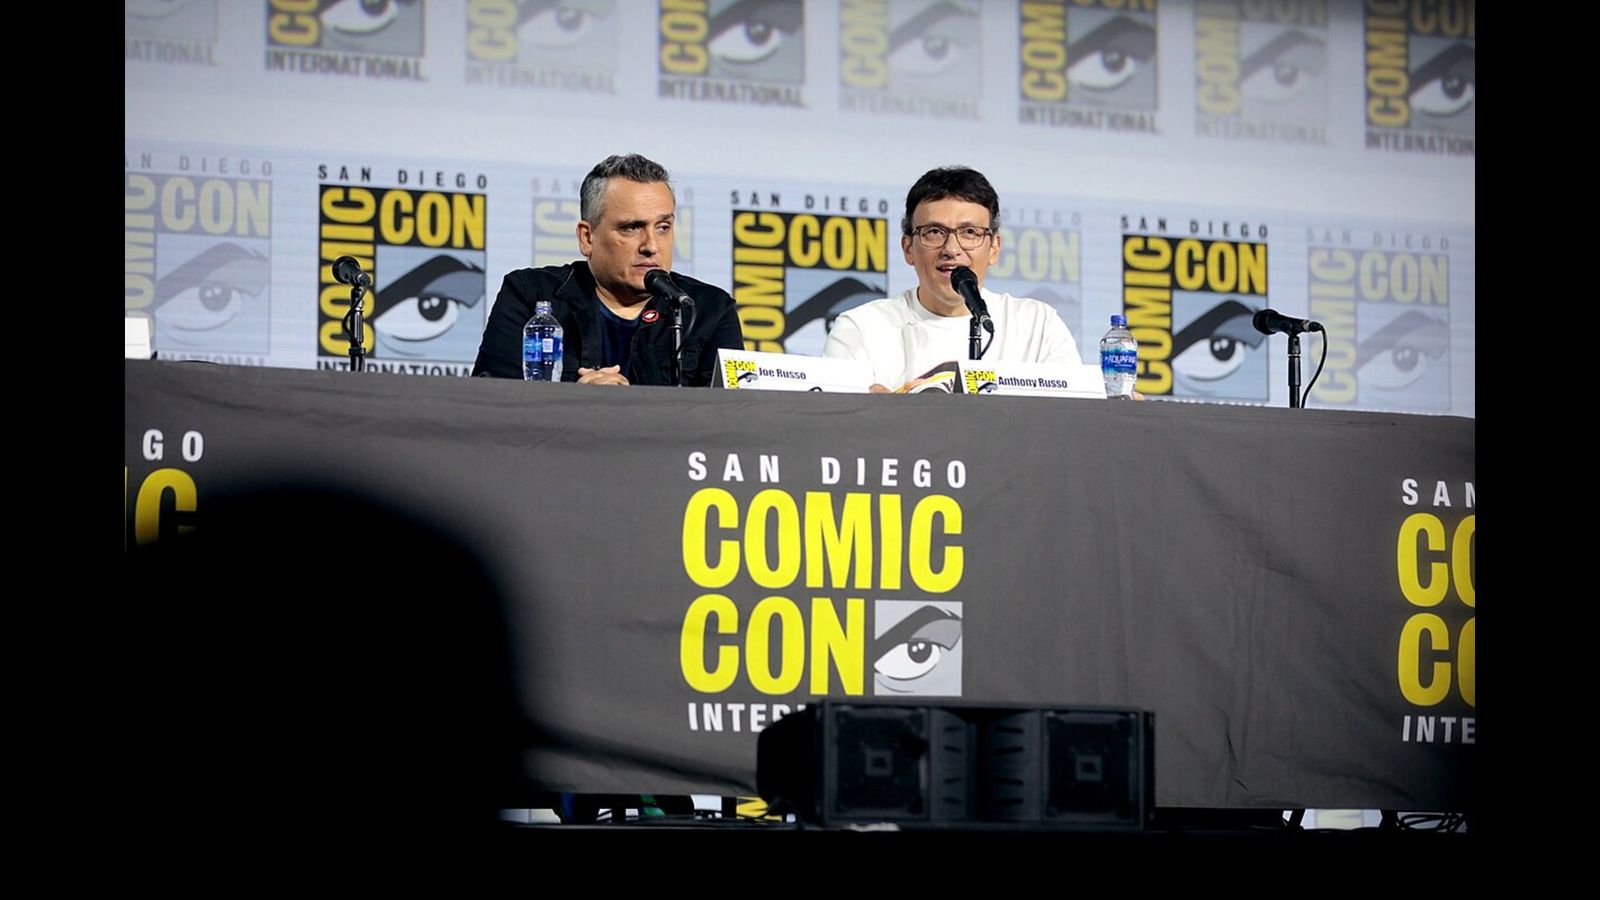 Joe Russo and Anthony Russo speaking at the 2019 San Diego Comic Con International, for "A Conversation with the Russo Brothers", at the San Diego Convention Center in San Diego, California.